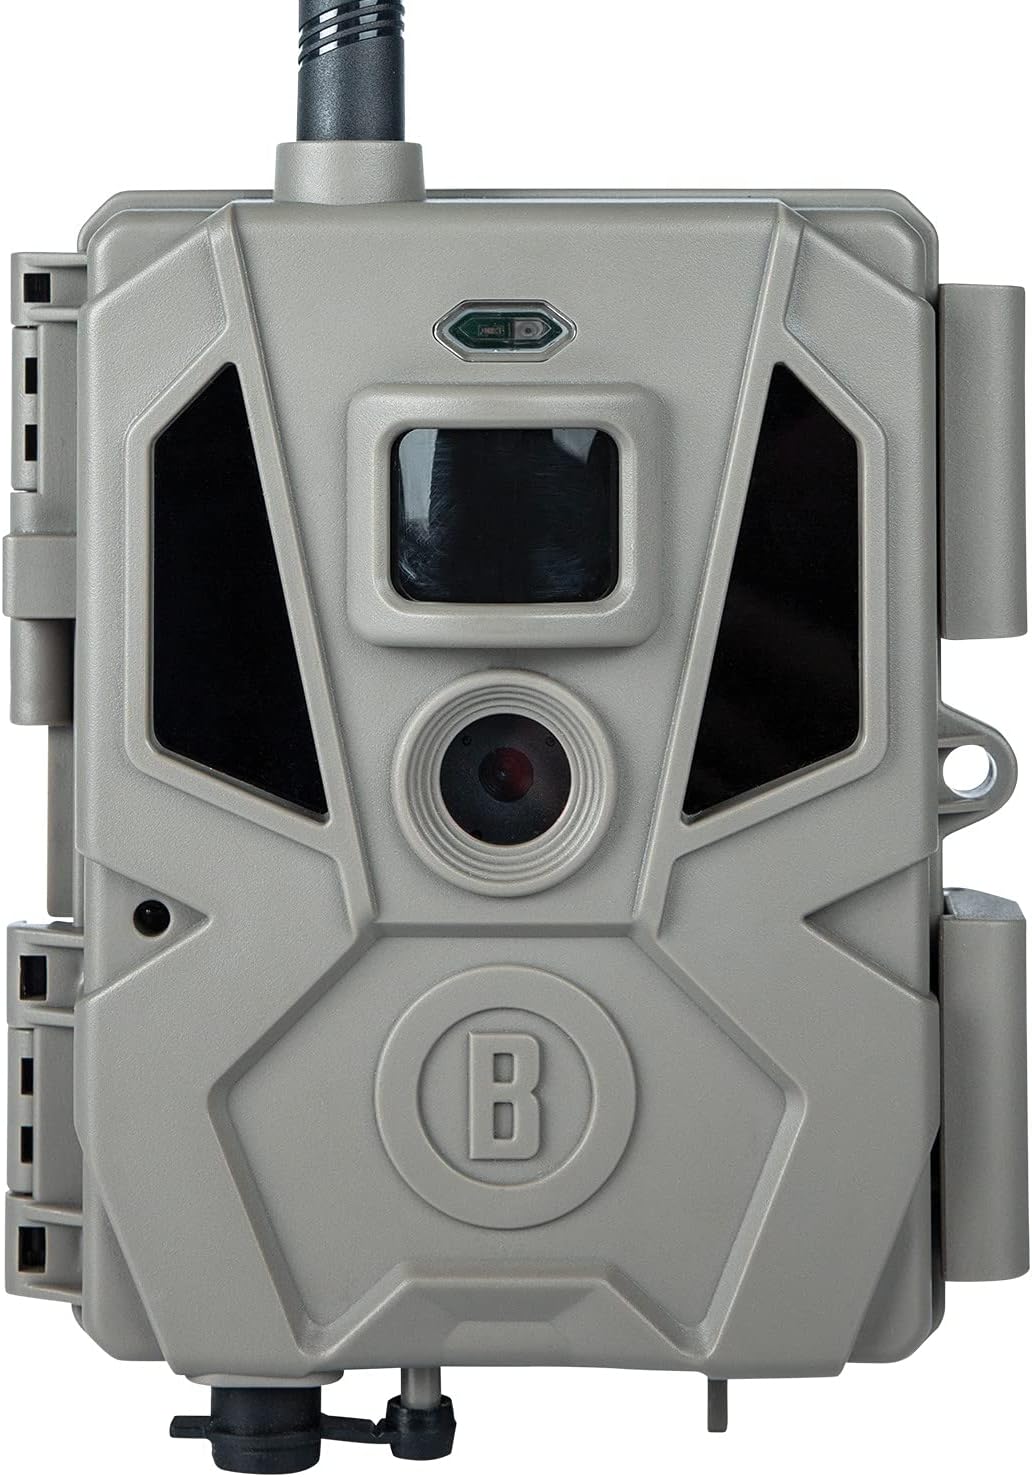 Primos Hunting Bushnell Cellucore 20 Trail Camera AT&T